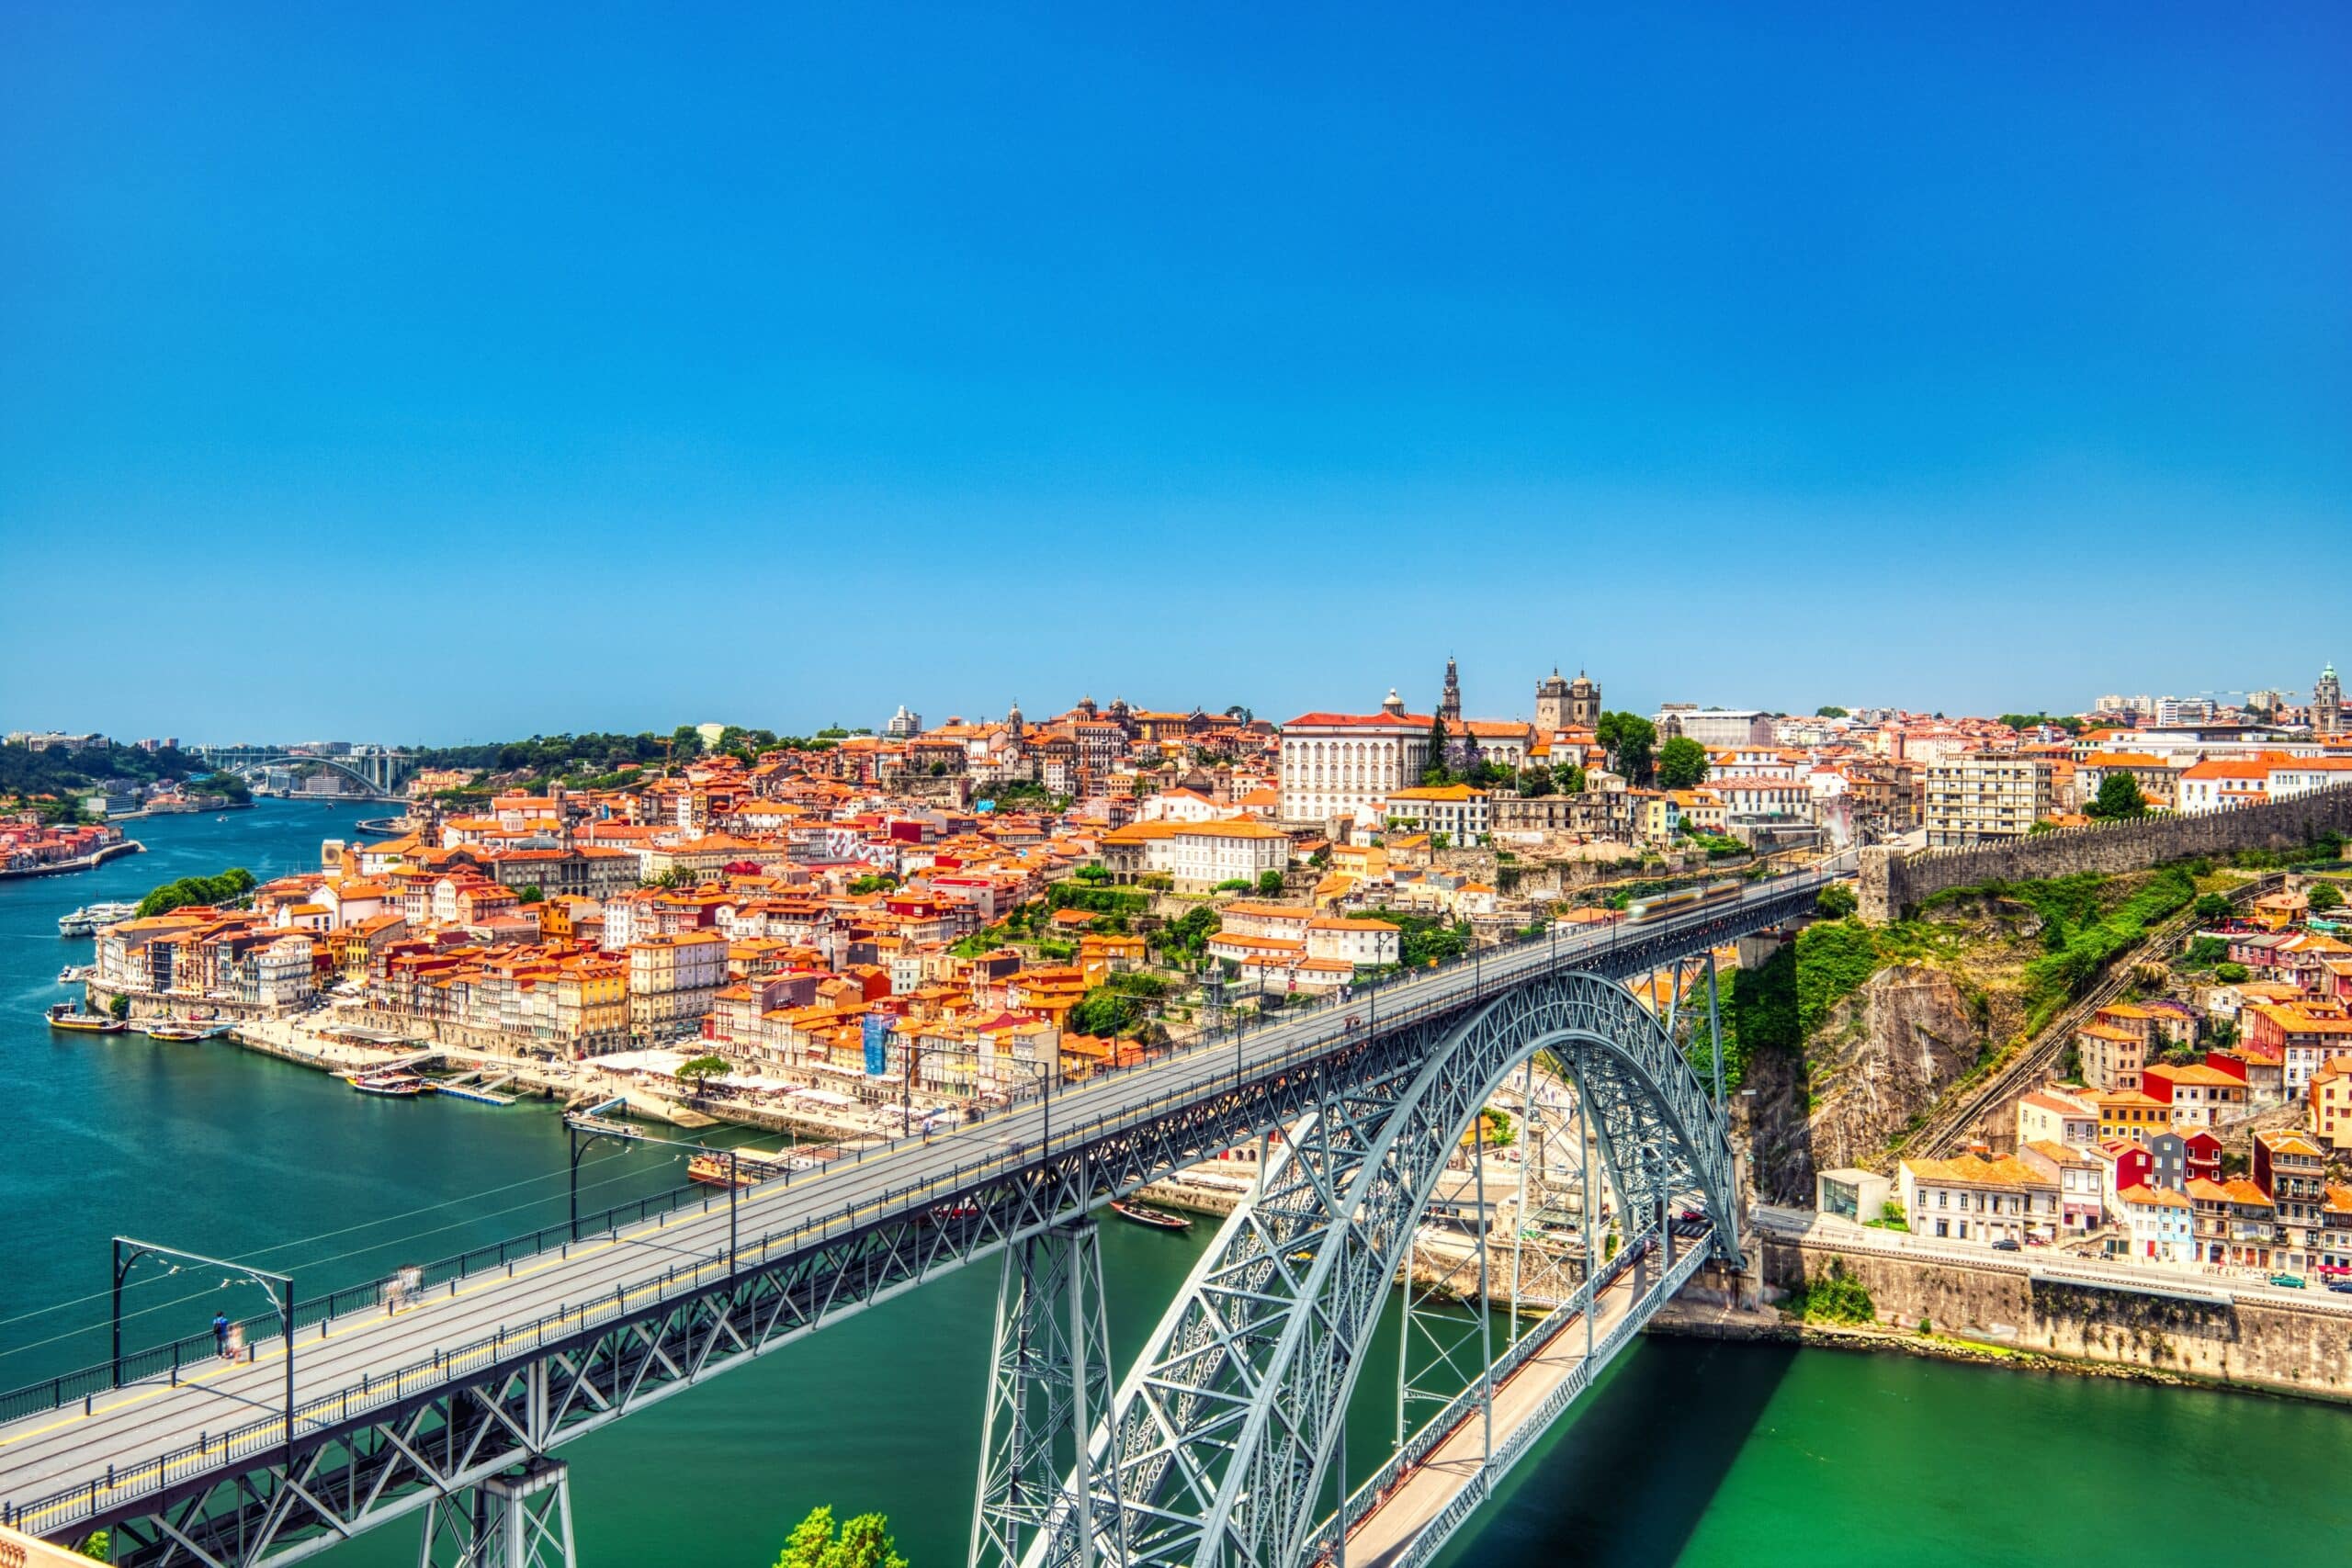 Conscensia's modern development center in Porto, showcasing Portugal's commitment to growing its IT sector.